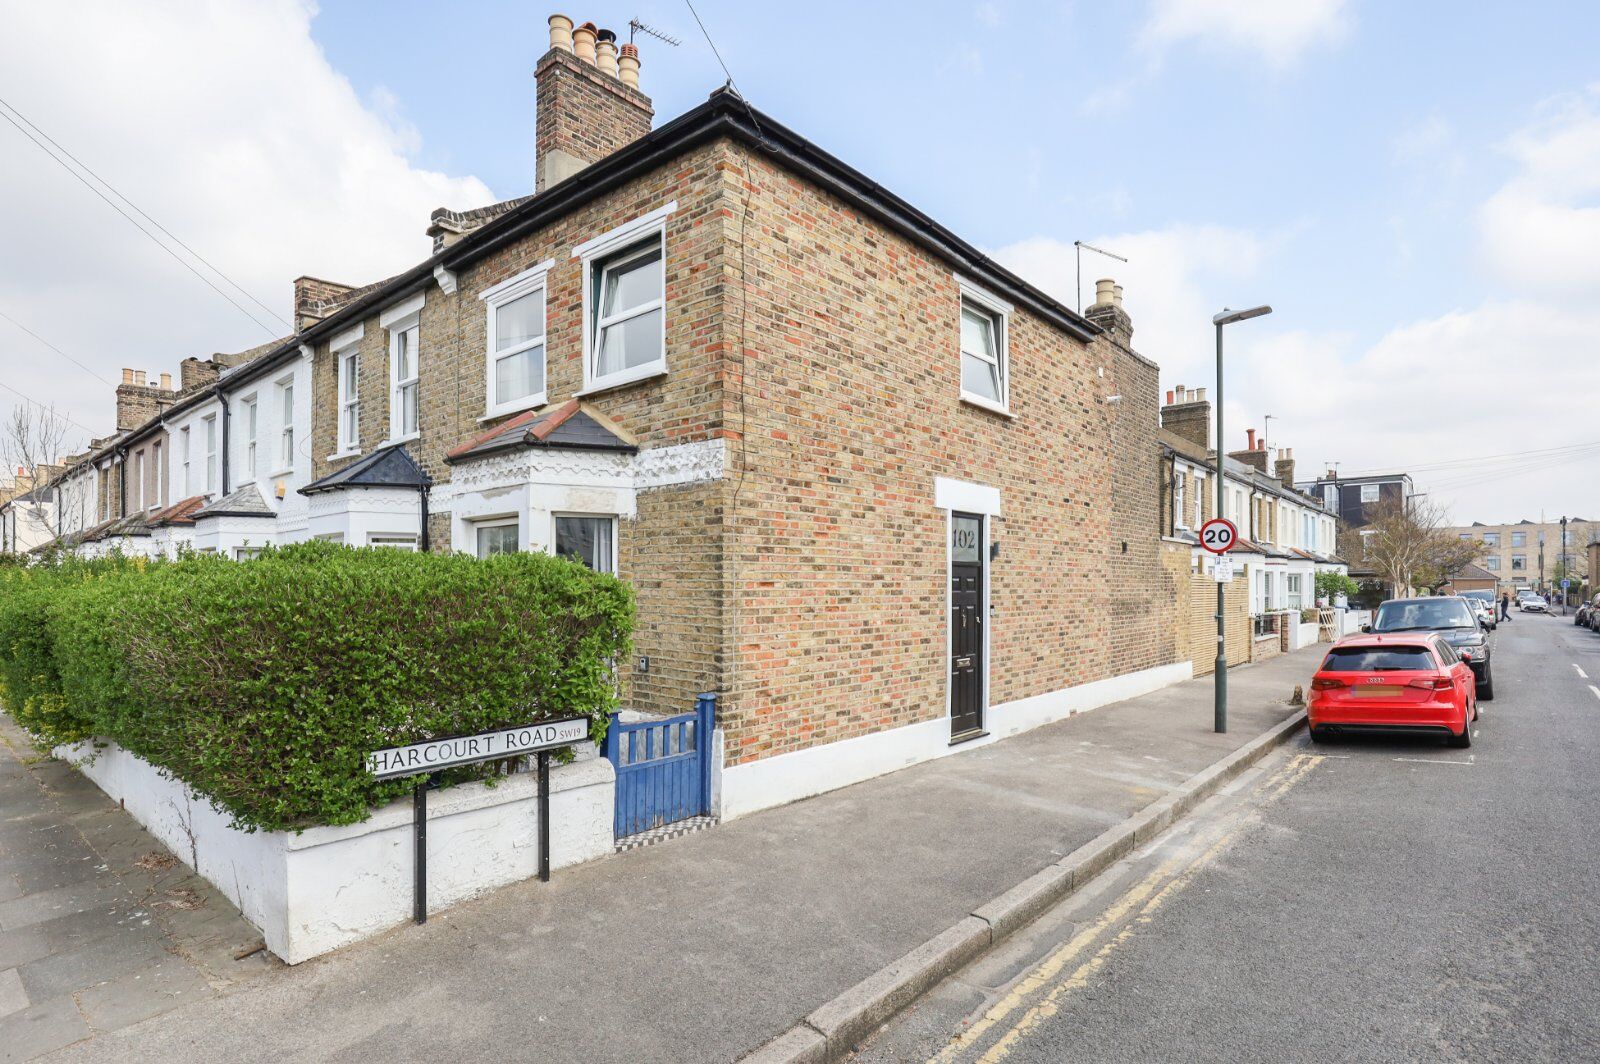 2 bedroom end terraced house for sale Russell Road, Wimbledon, SW19, main image